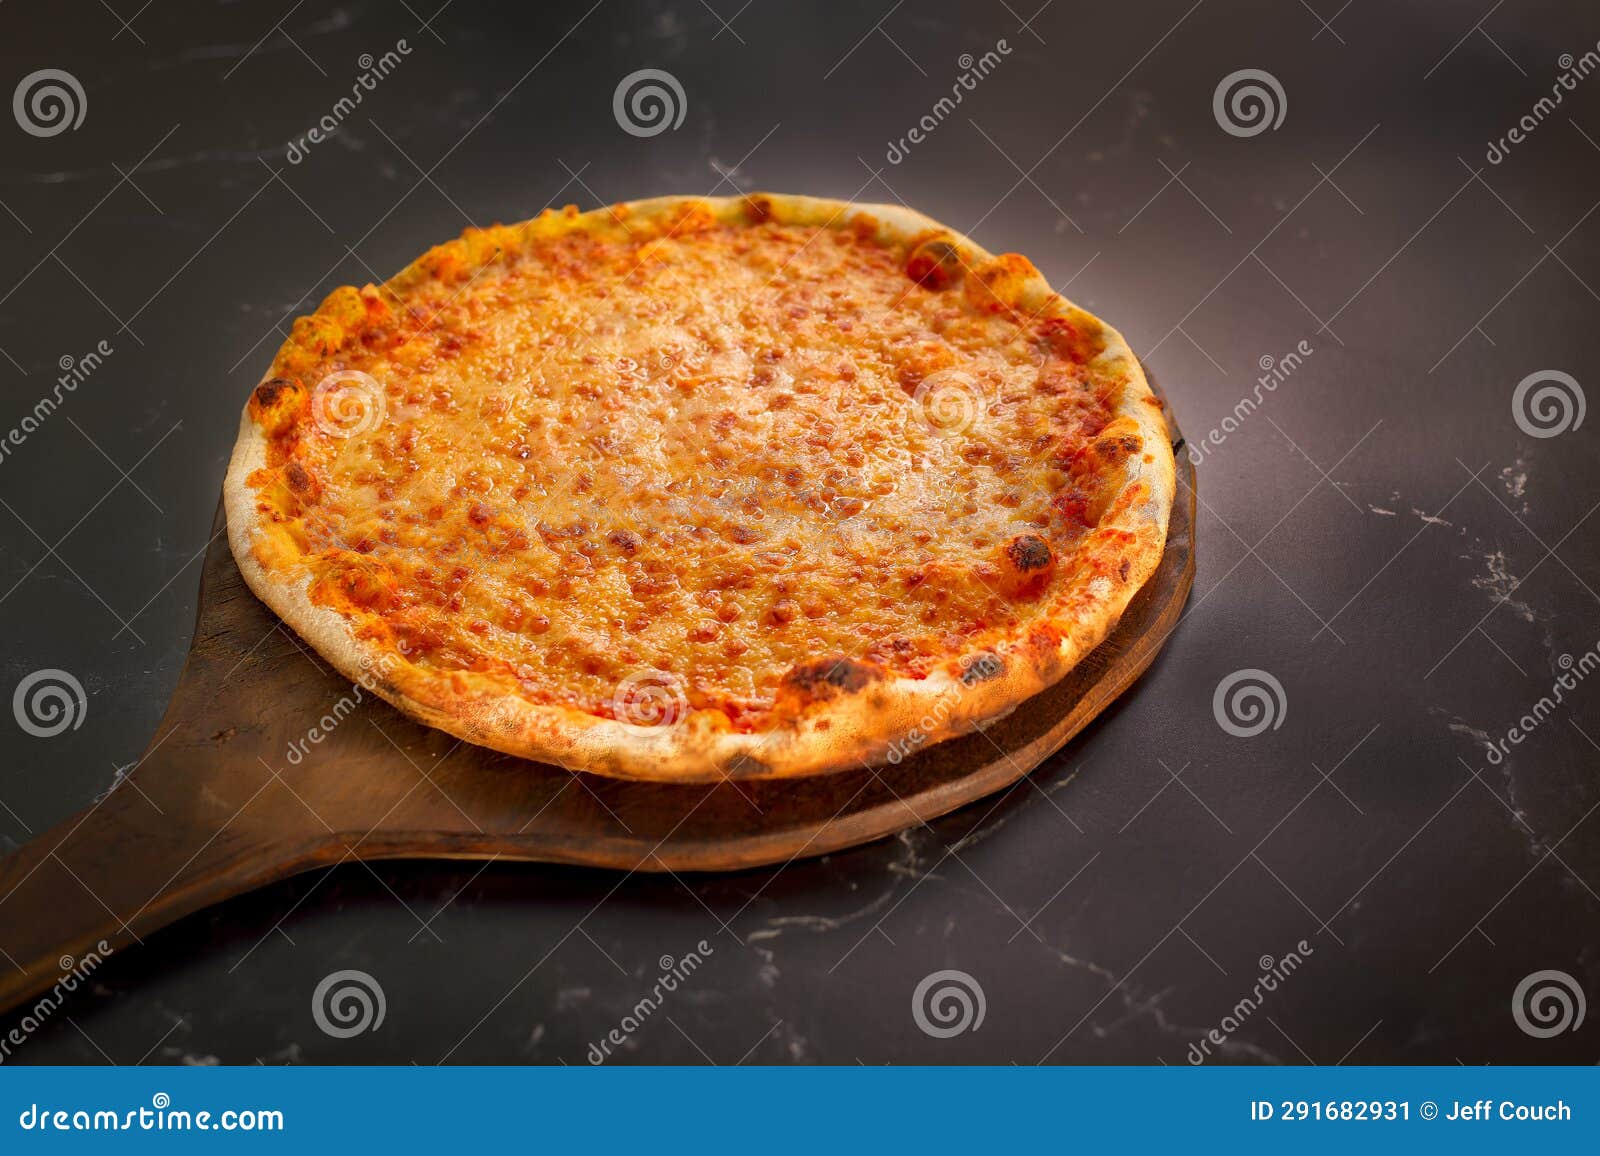 https://thumbs.dreamstime.com/z/wood-fired-cheese-pizza-whole-uncut-peel-sliding-onto-black-marble-counter-top-291682931.jpg